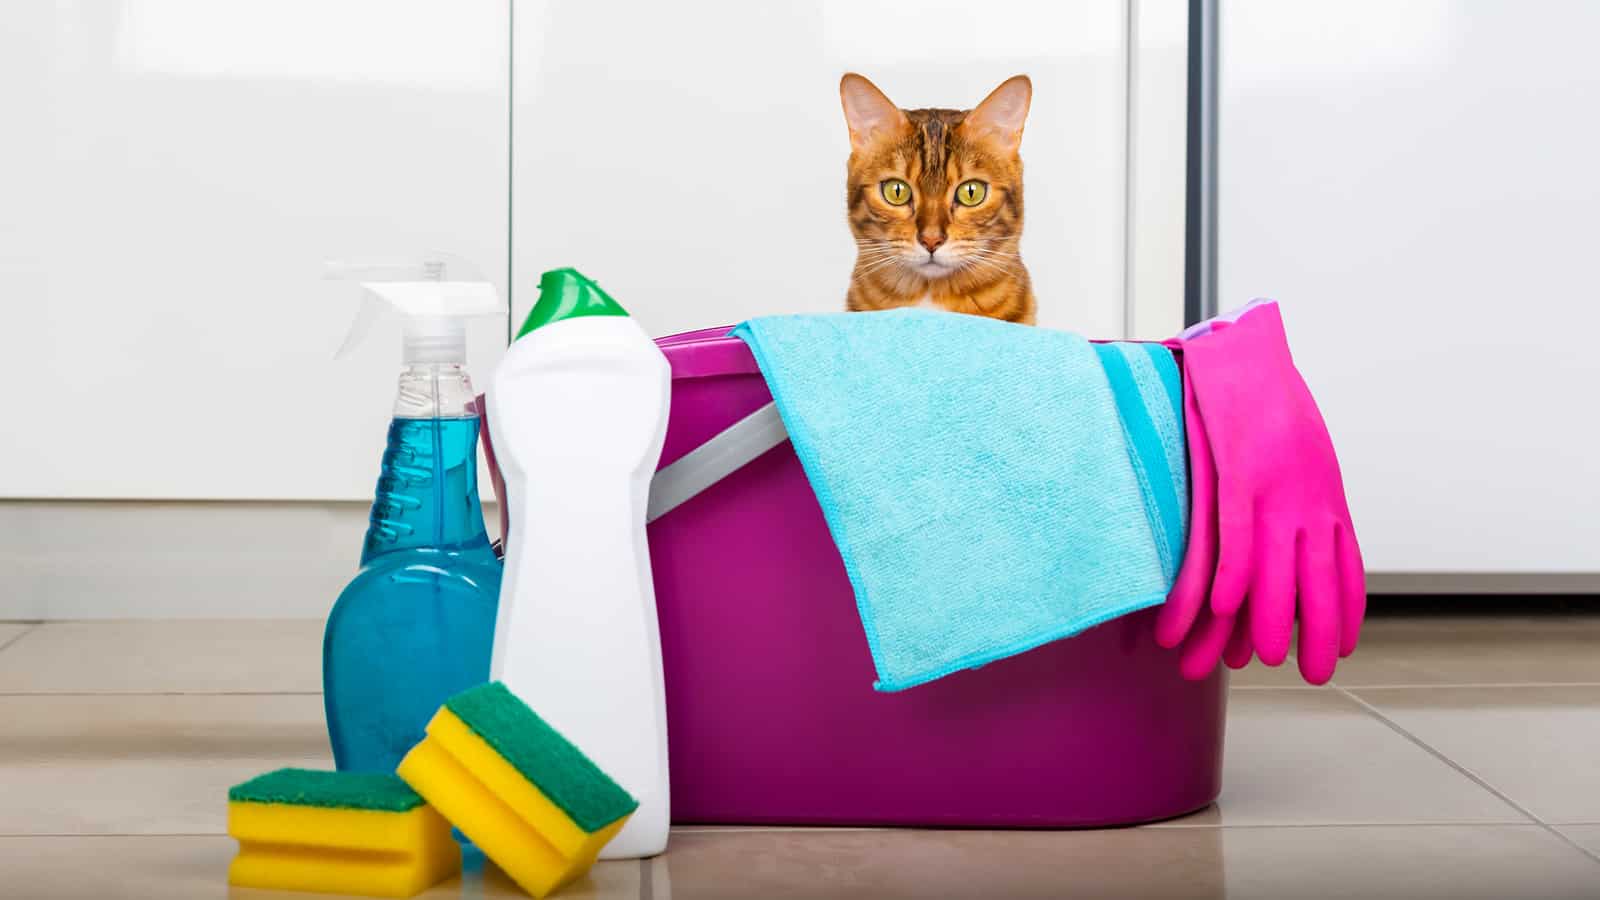 Household cleaning products and tools on the floor. The cat looks out of the bucket. Cleaning concept